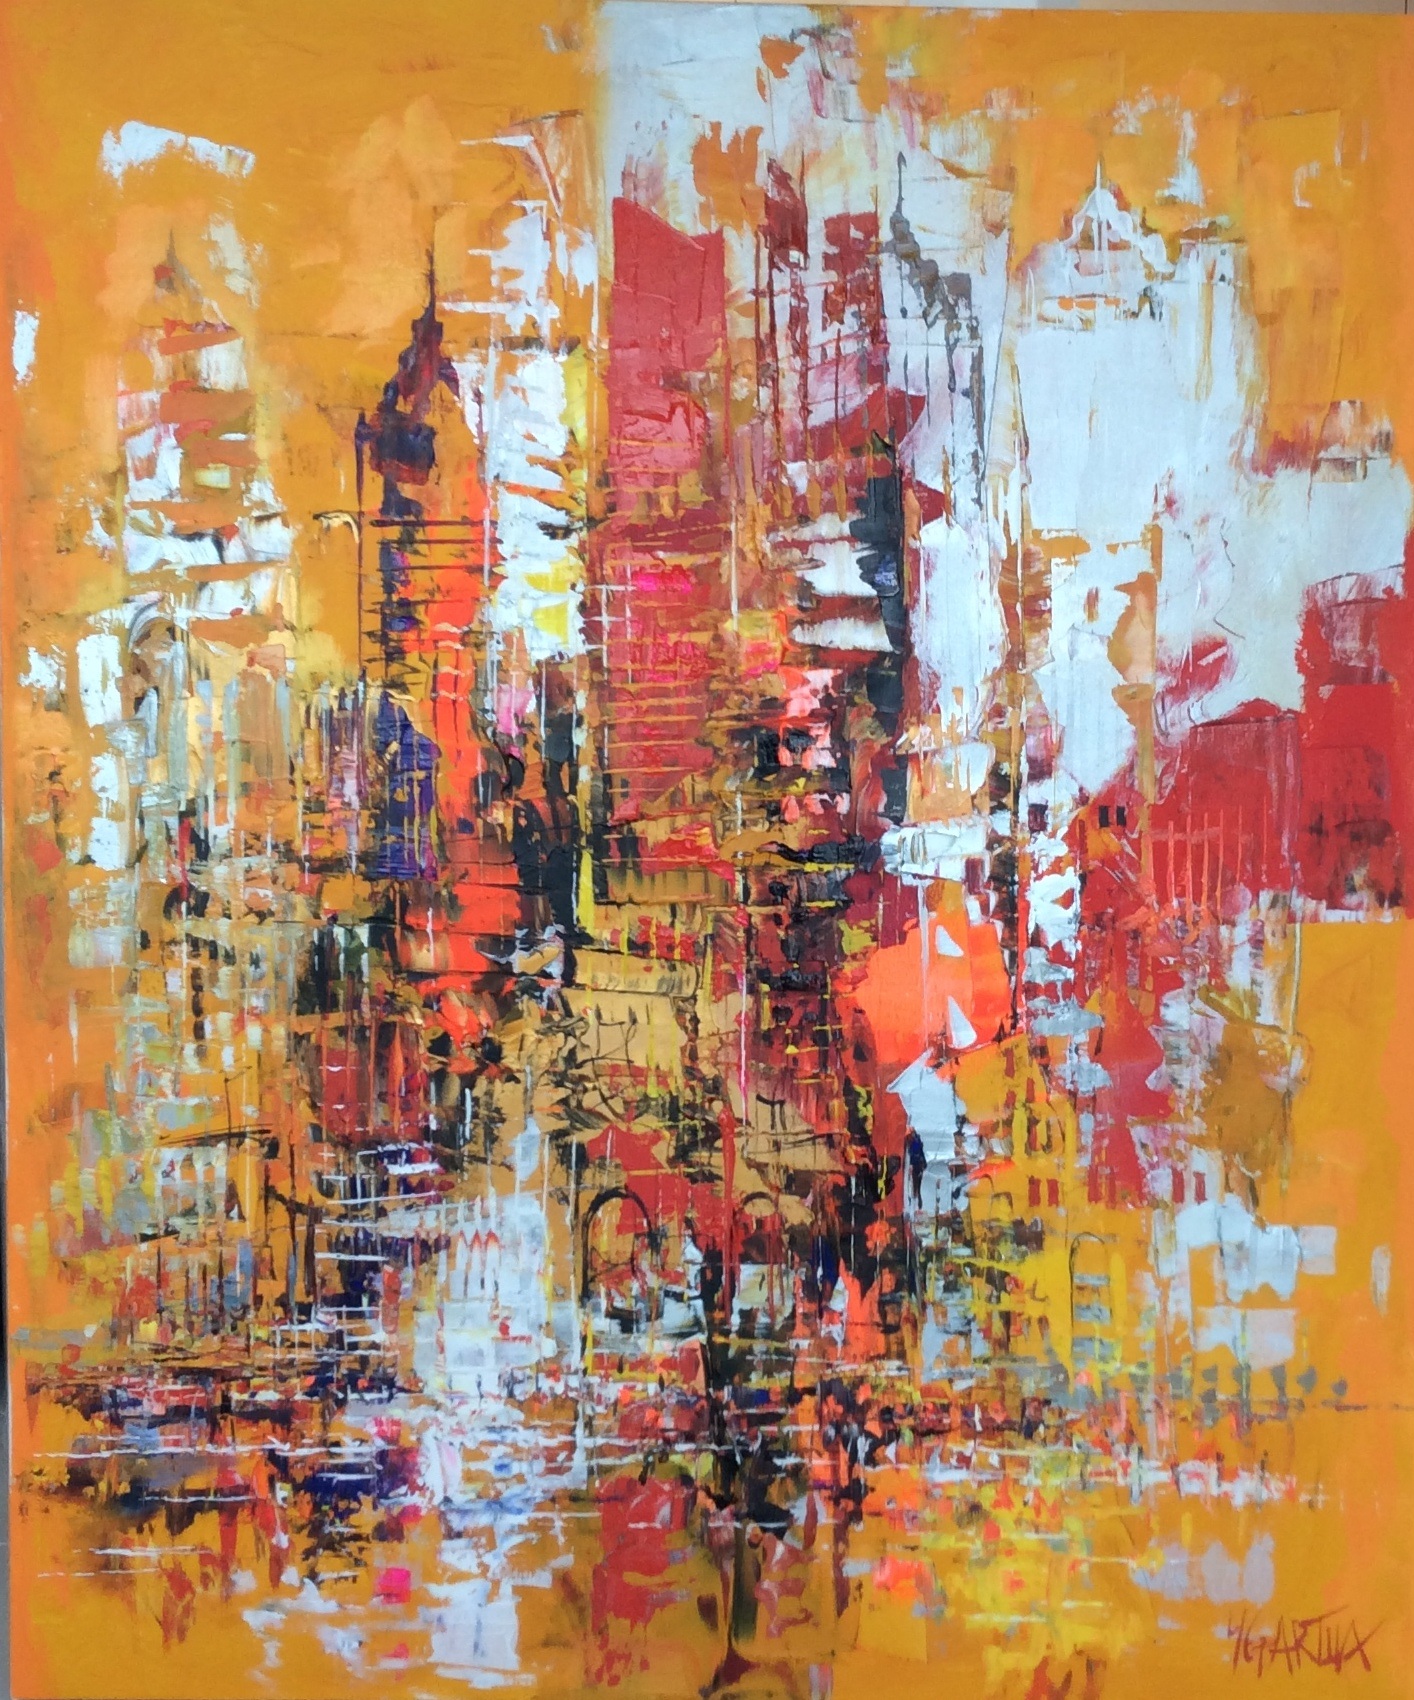 CITIES OF THE WORLD – Abstract Art